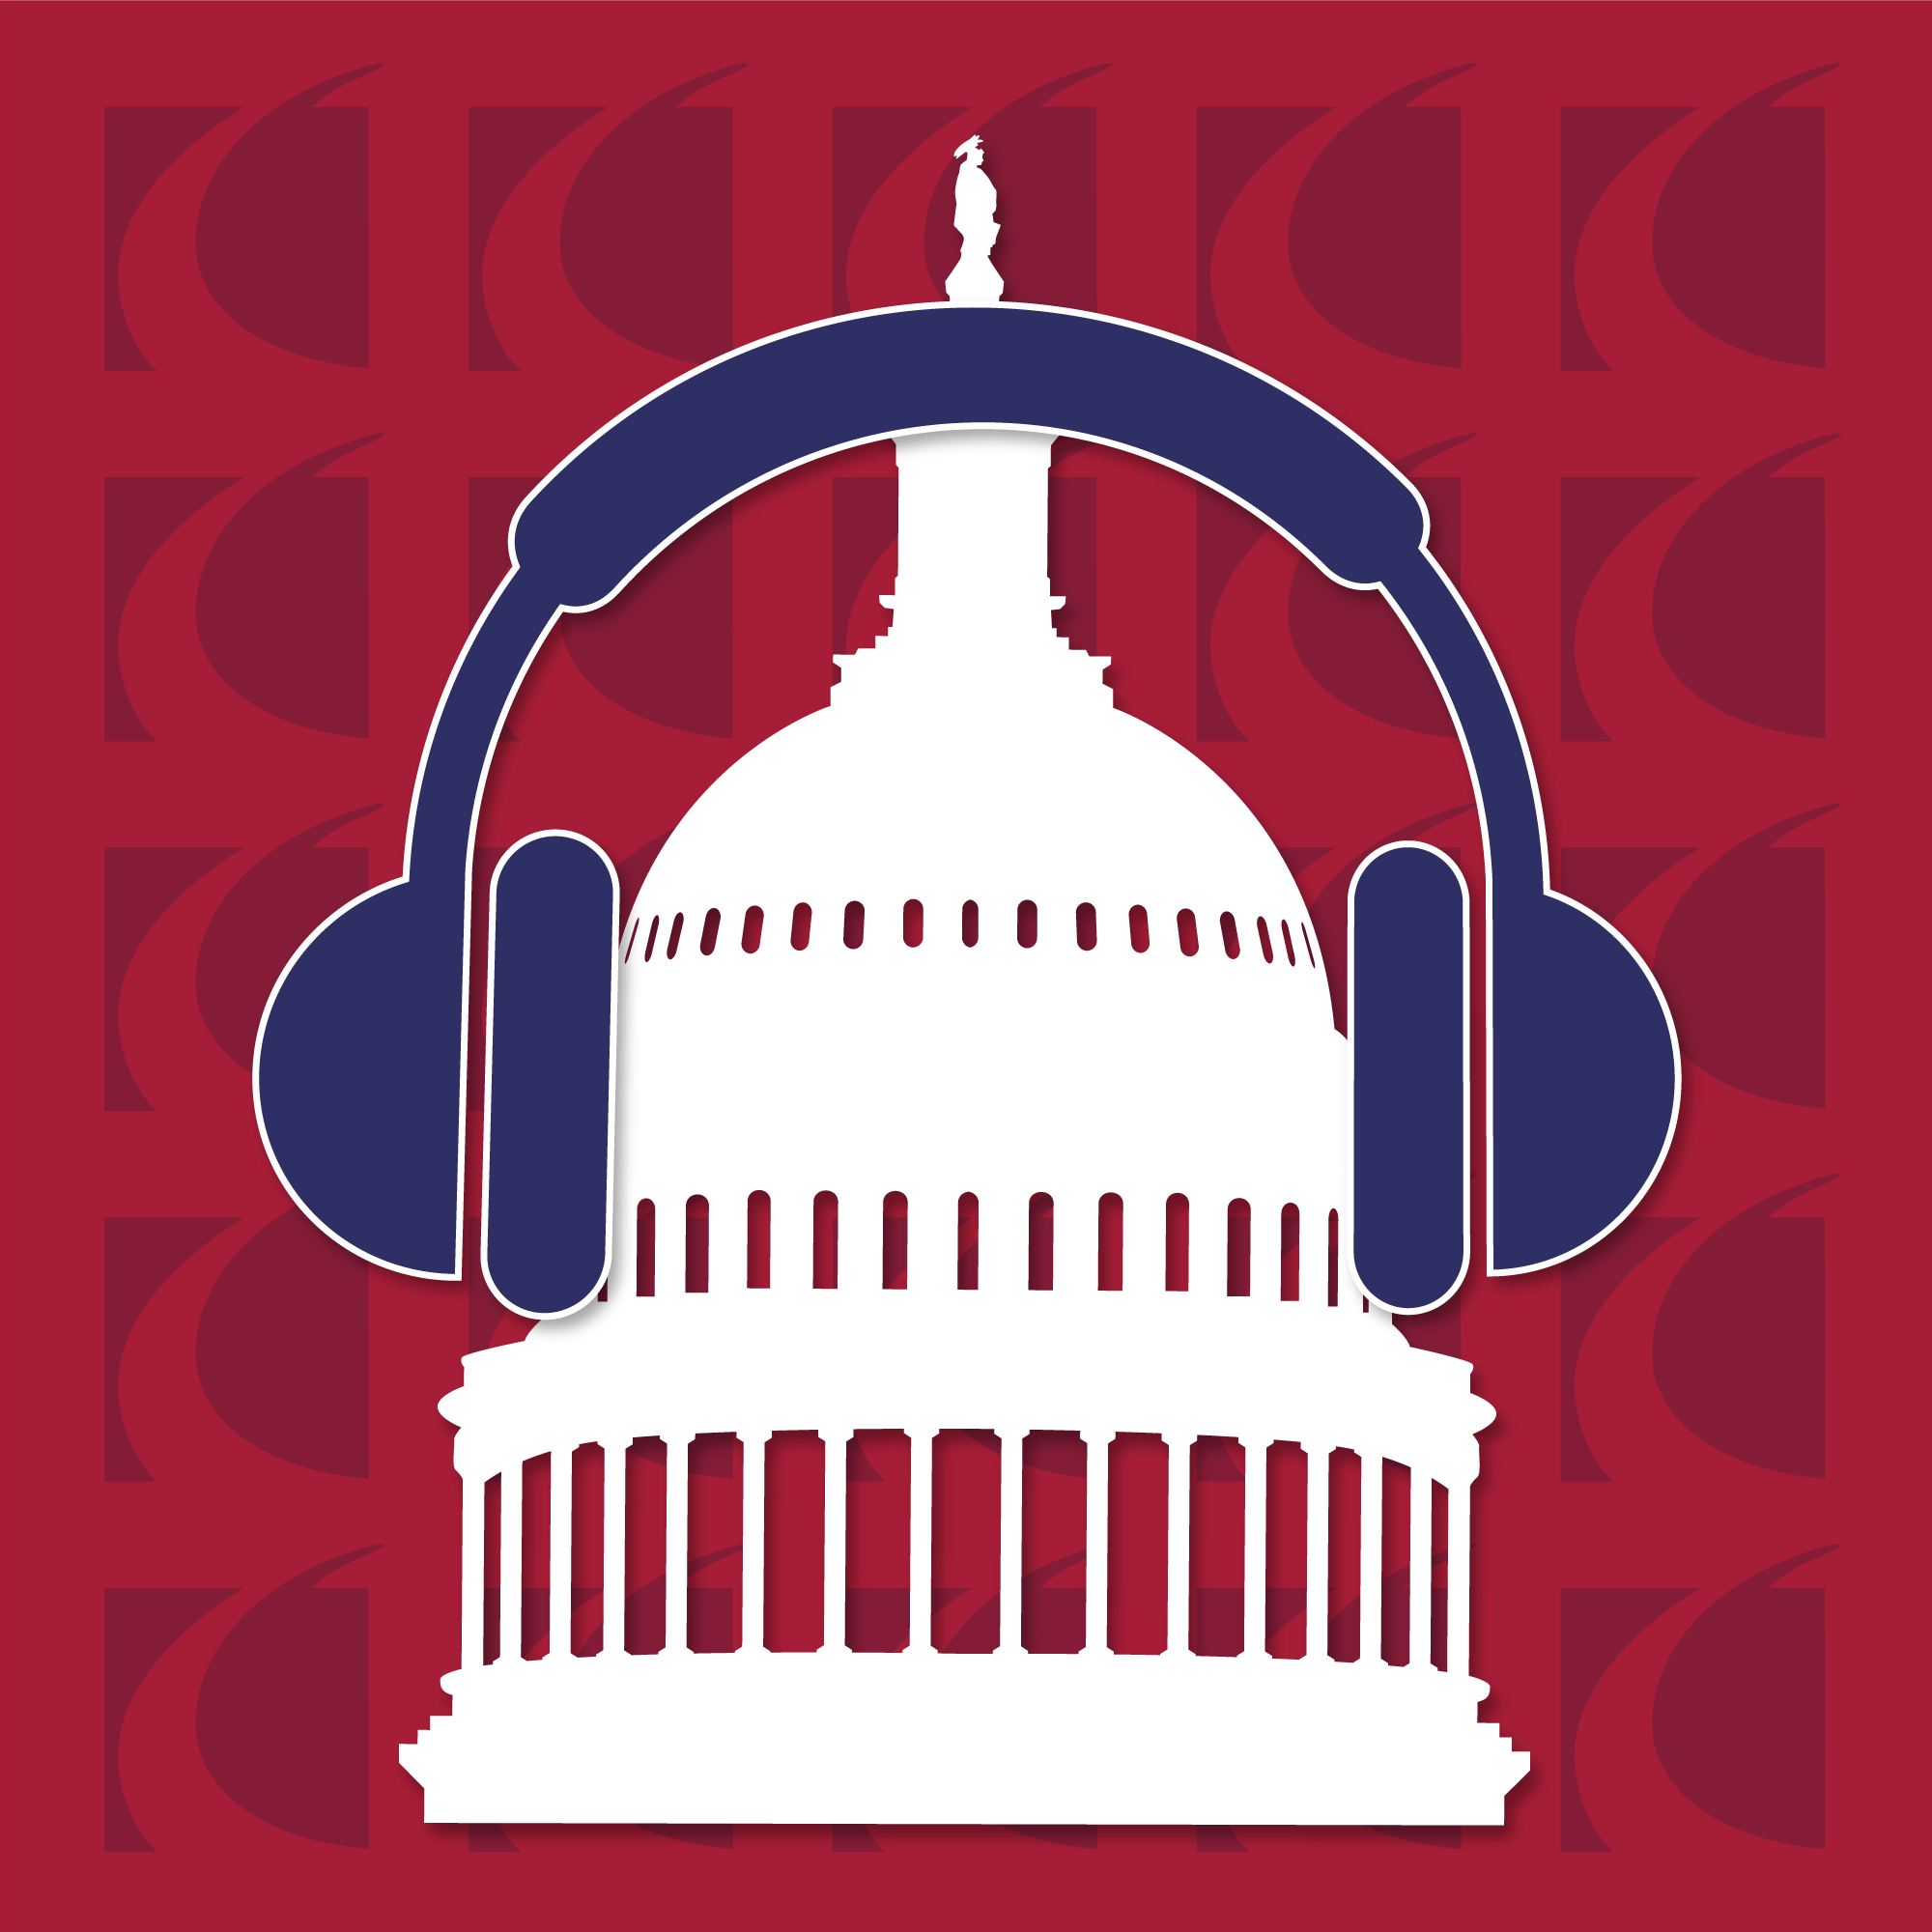 June 30: Fastest 5 Minutes, The Podcast Gov’t Contractors Can’t Do Without - Crowell & Moring LLP